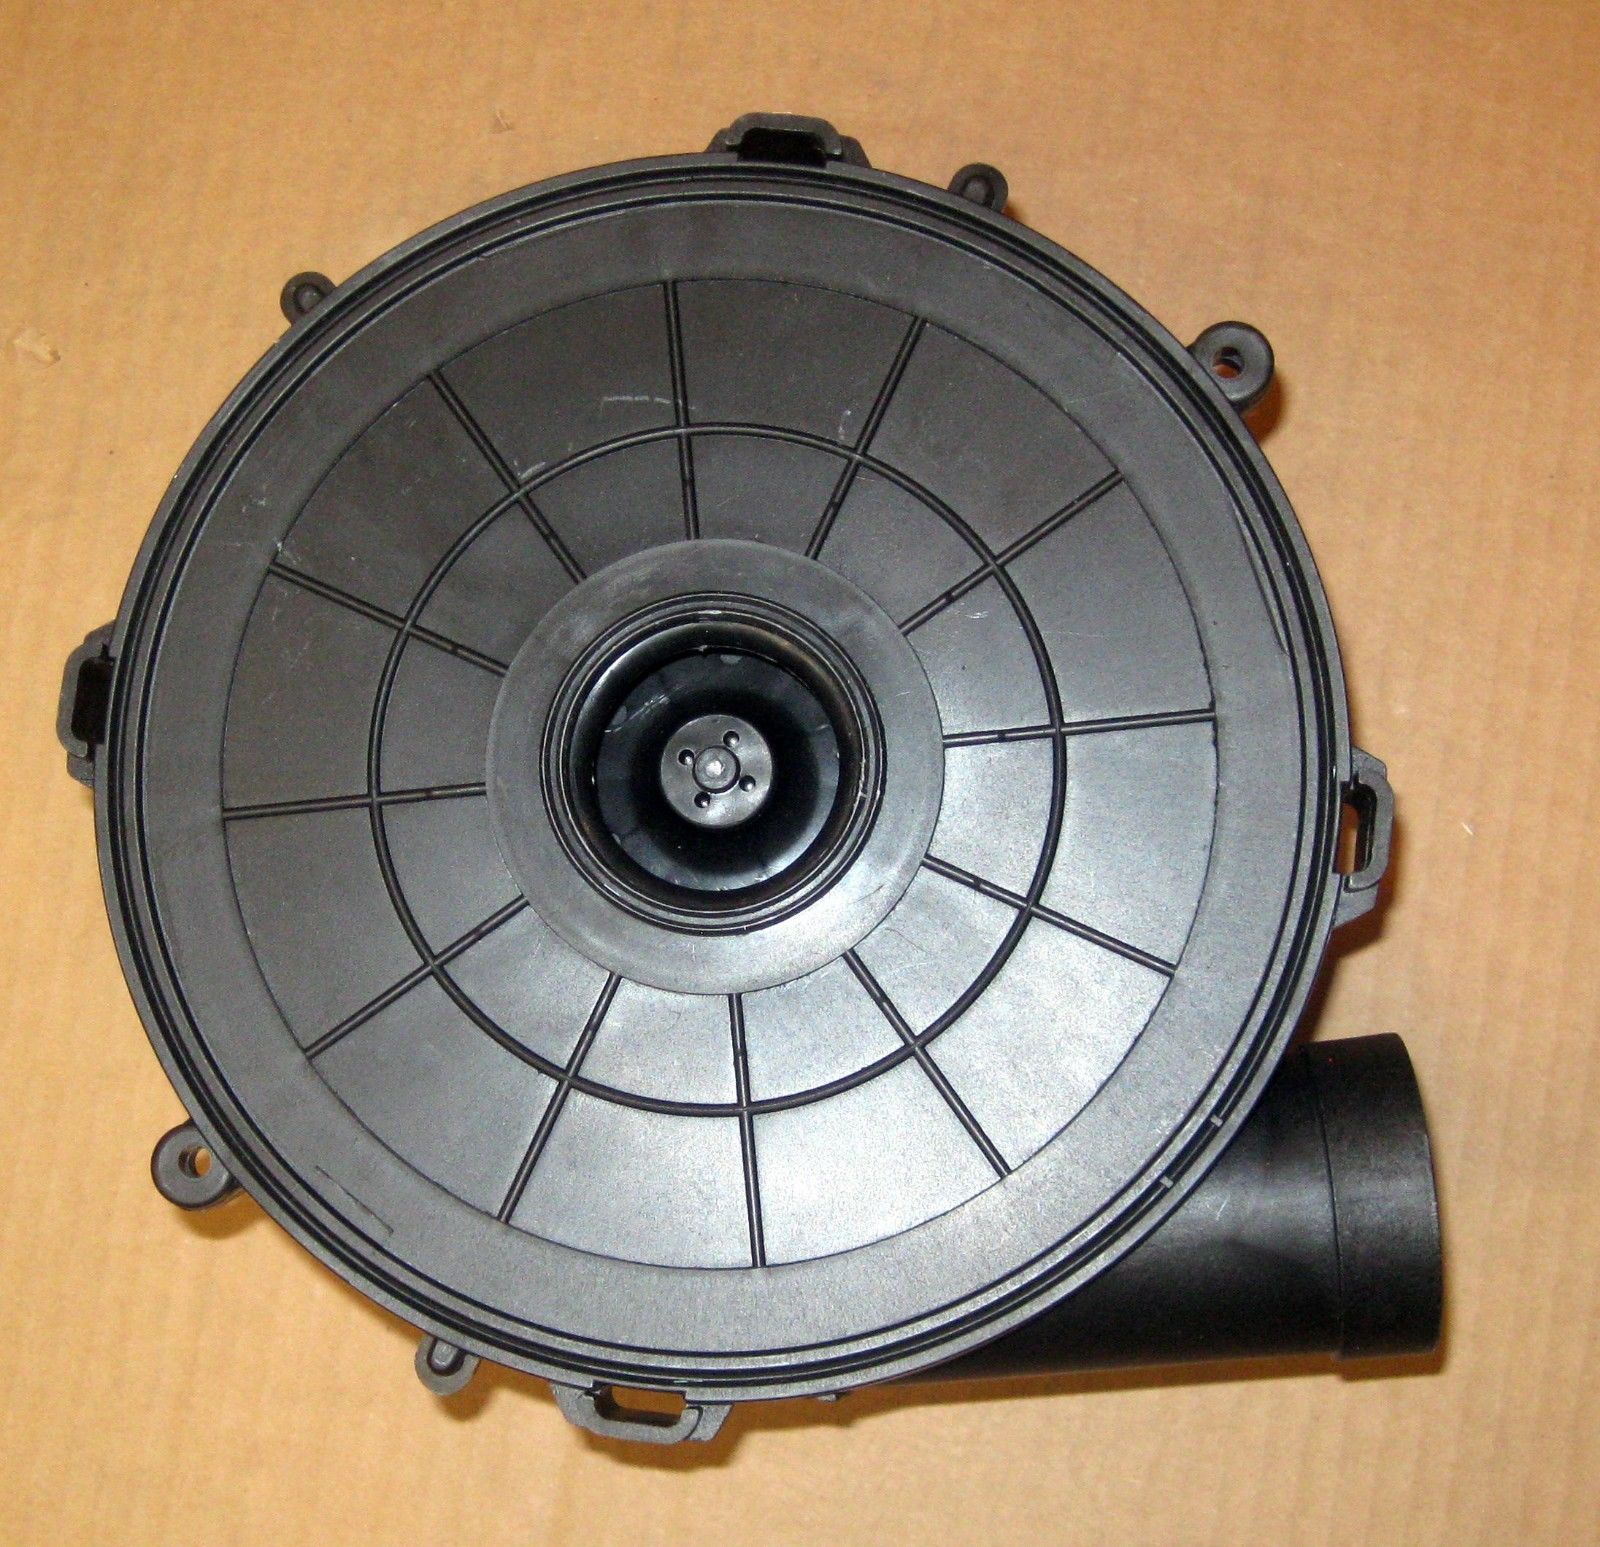 Fasco A180 Draft Inducer Blower Motor for Goodman 7021-9625 201-90601 - image 5 of 9